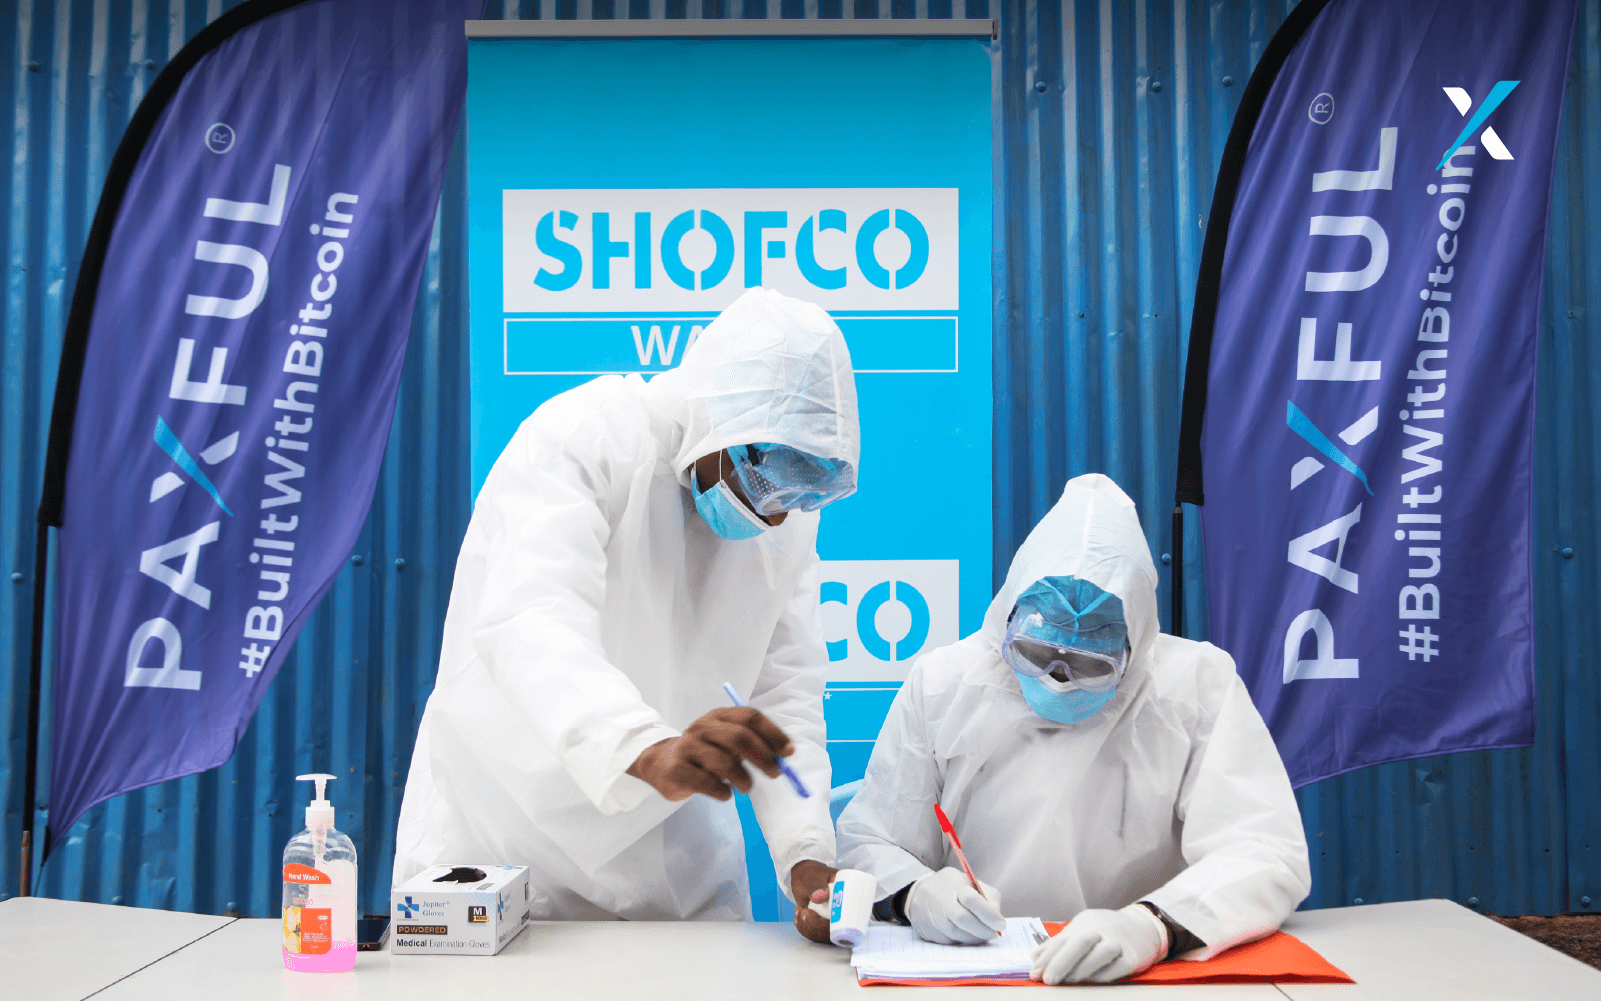 Paxful Partners with SHOFCO to Help Kenyans During COVID-19